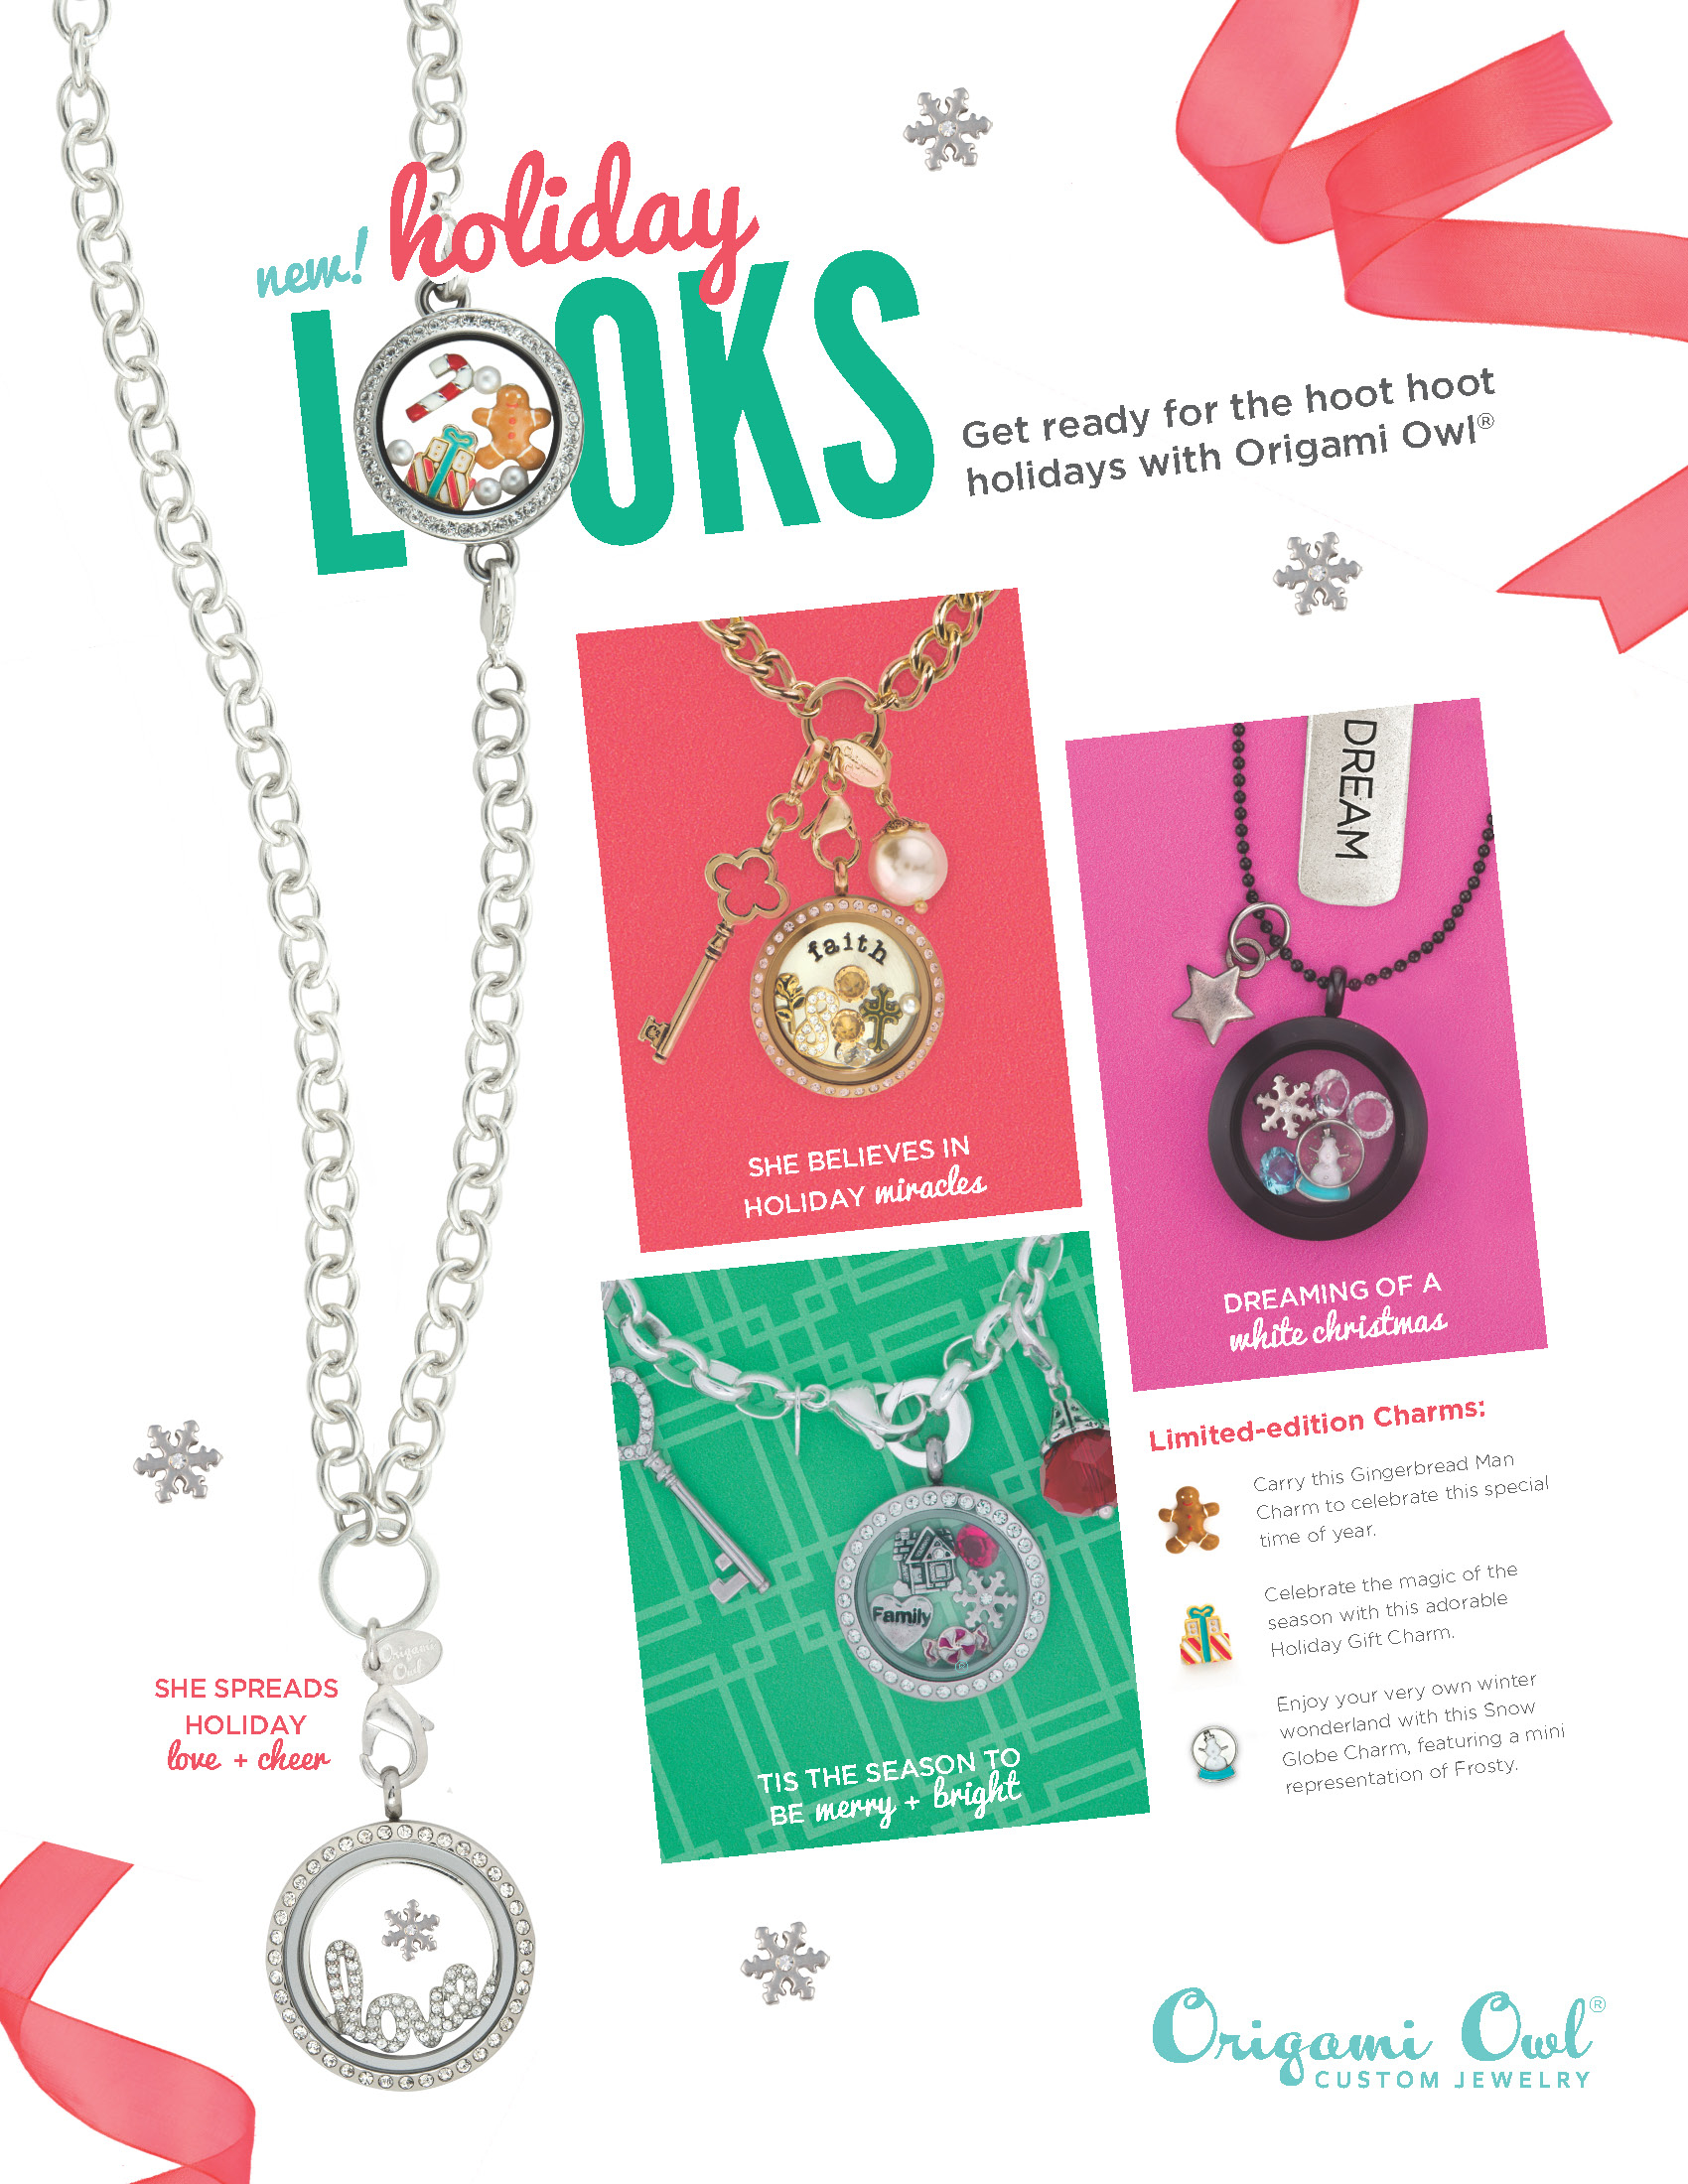 Origami Owl Christmas Charms Haute Hoot Barb Arnold Independent Designer With Origami Owl Page 2